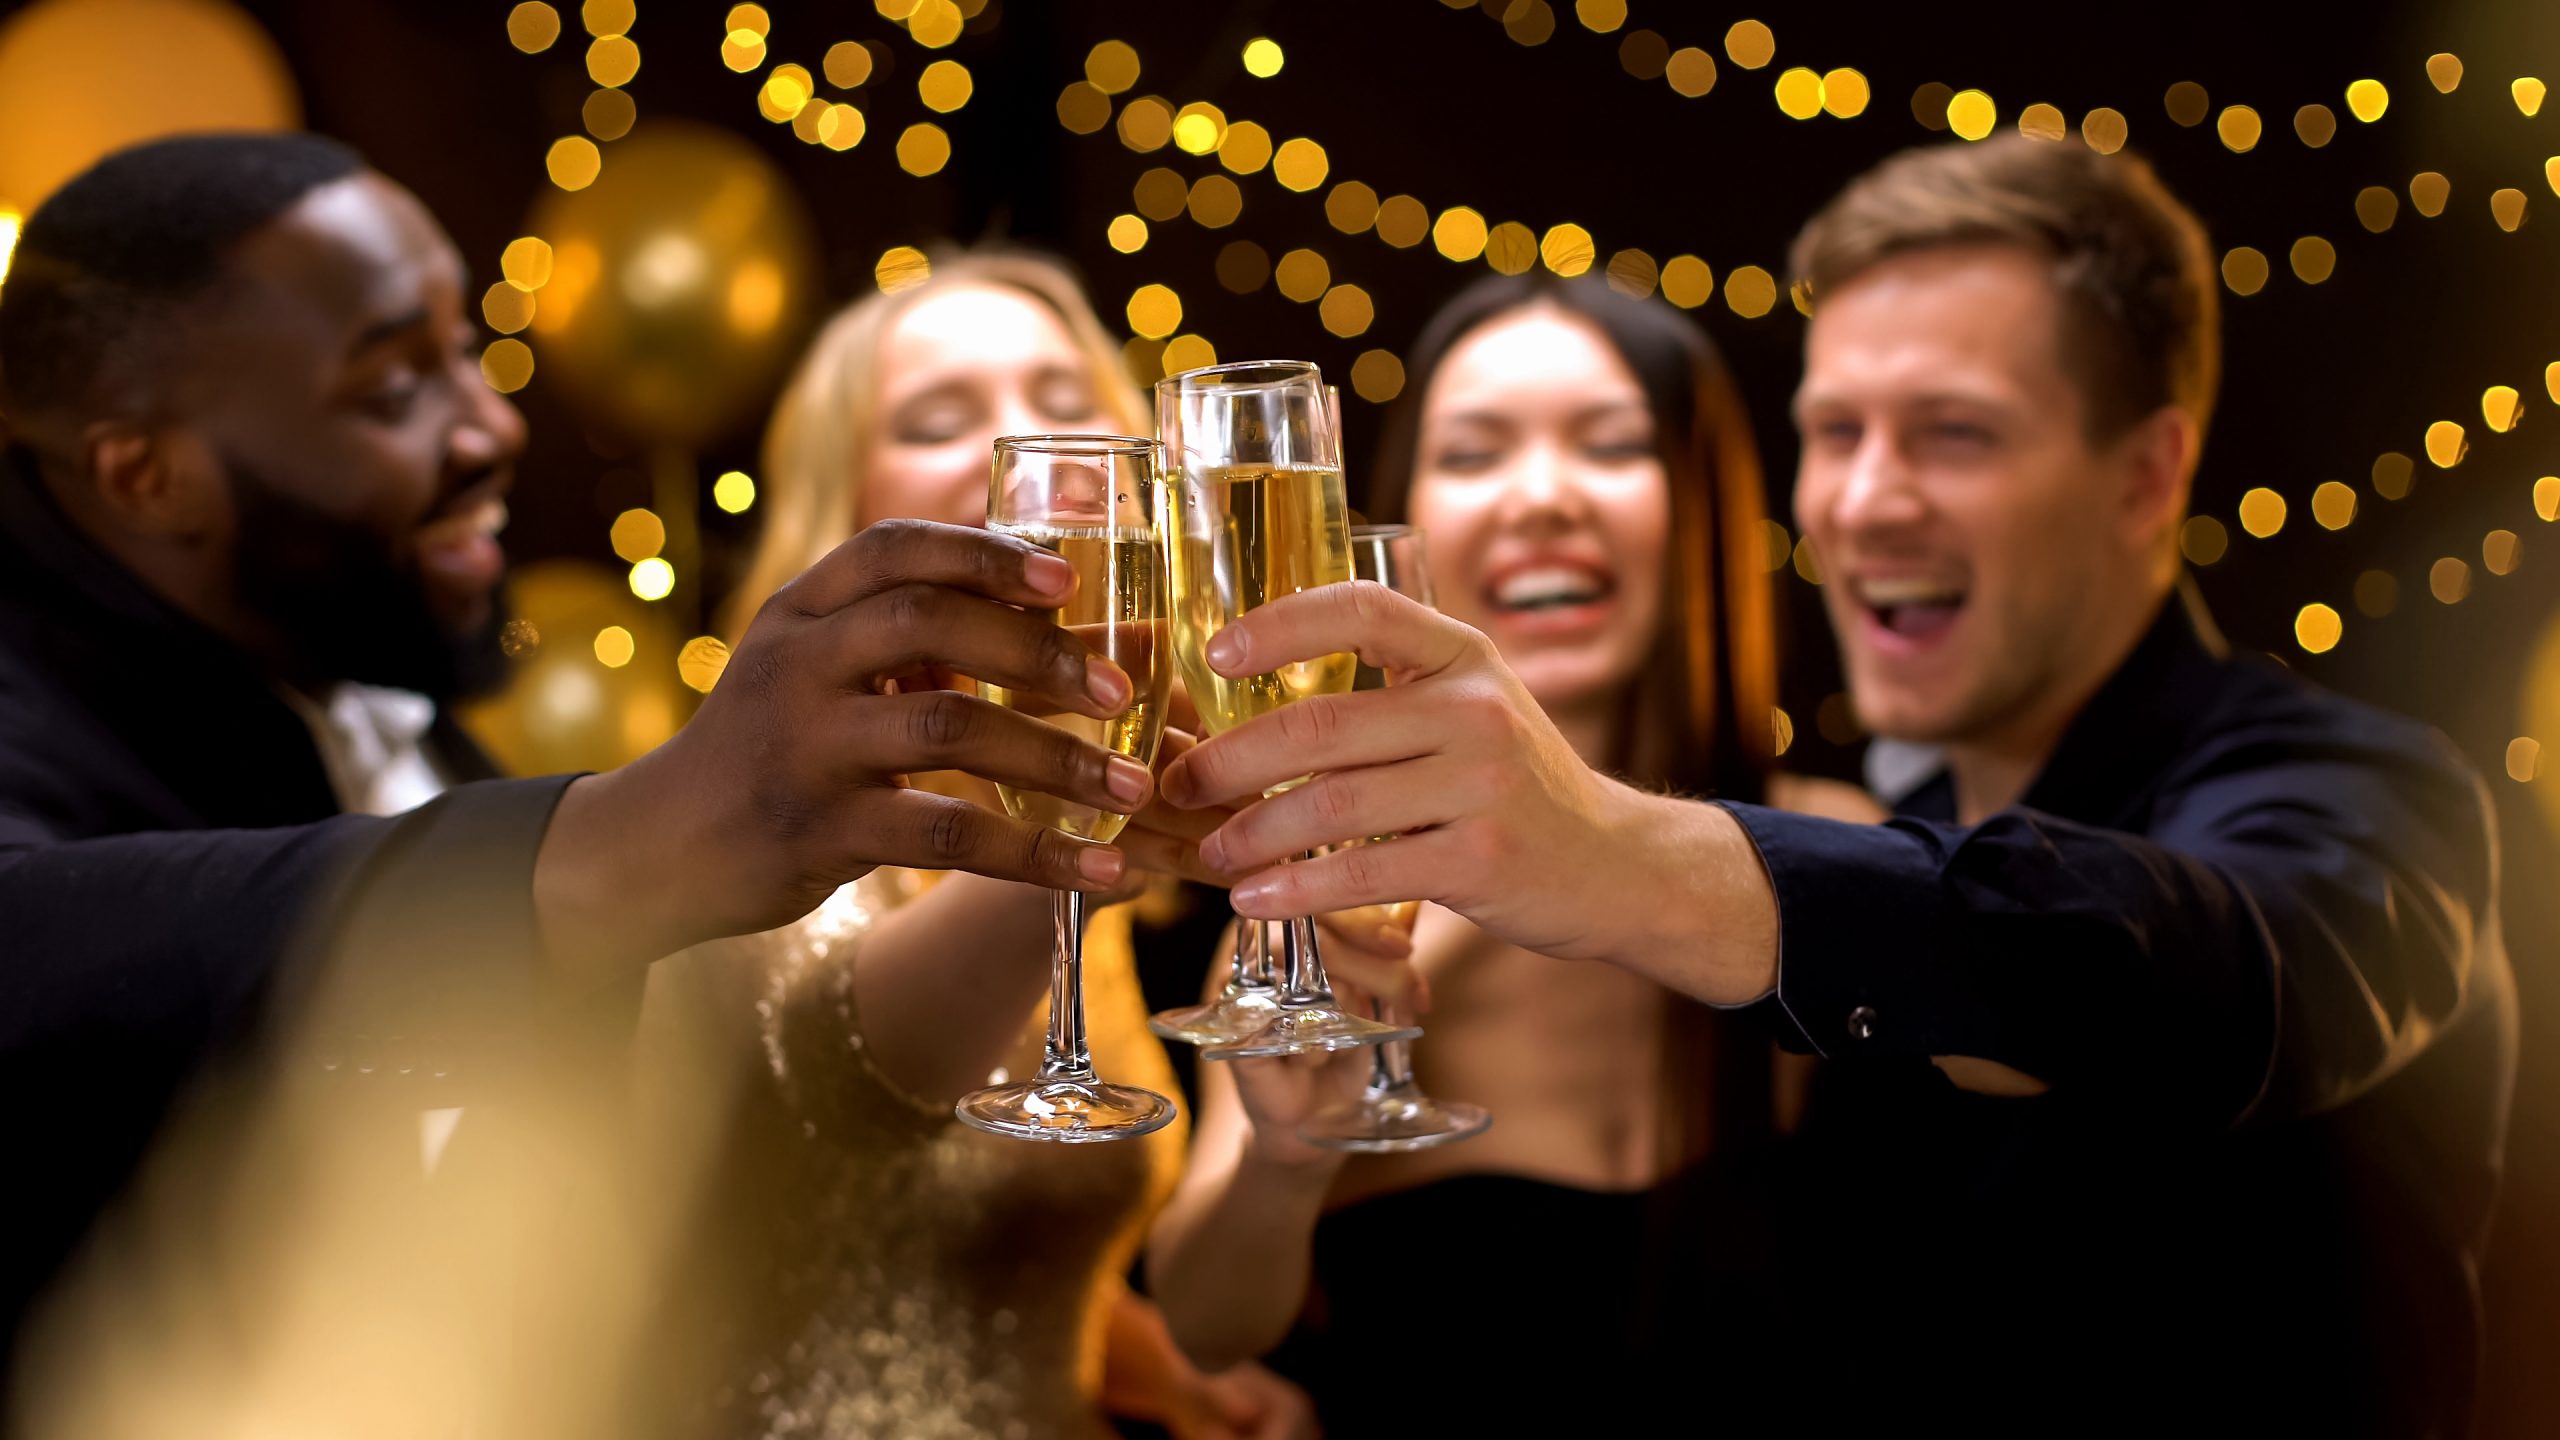 A group of four business colleagues toasts each other with glasses of champagne, surrounded by lights